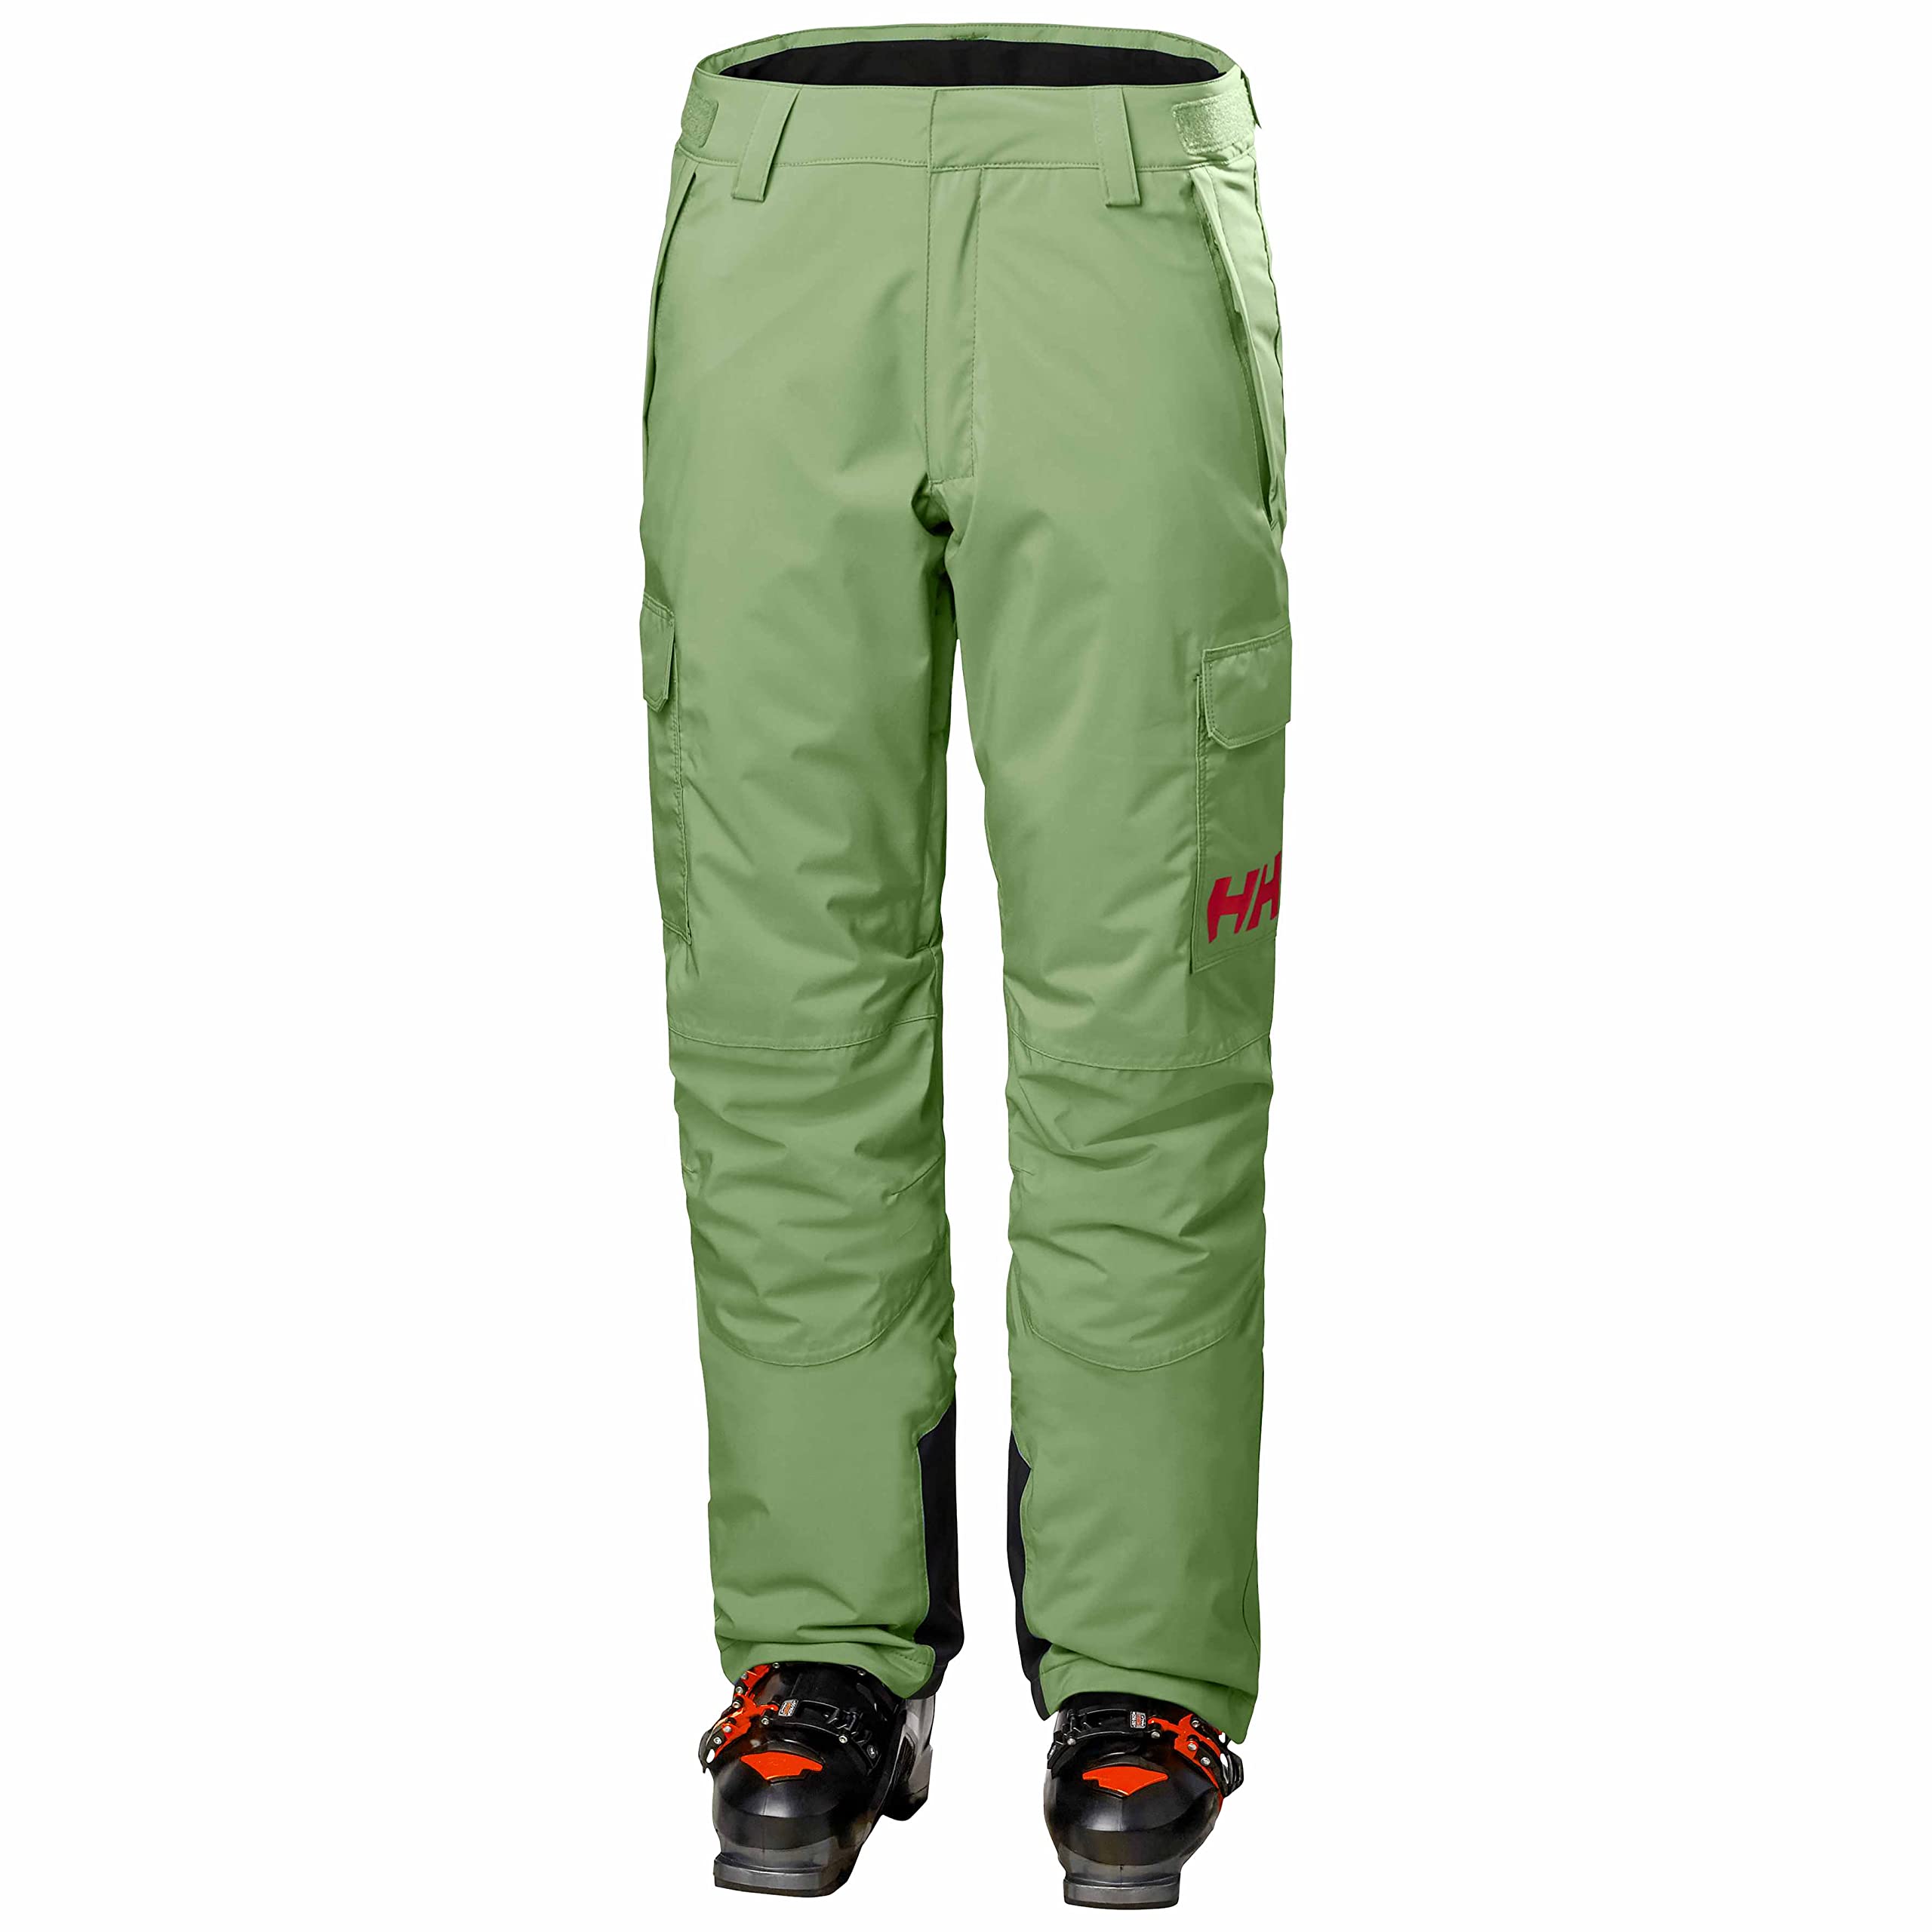 Helly-Hansen Women's Switch Cargo Insulated Pant X-Small 406 Jade 2.0